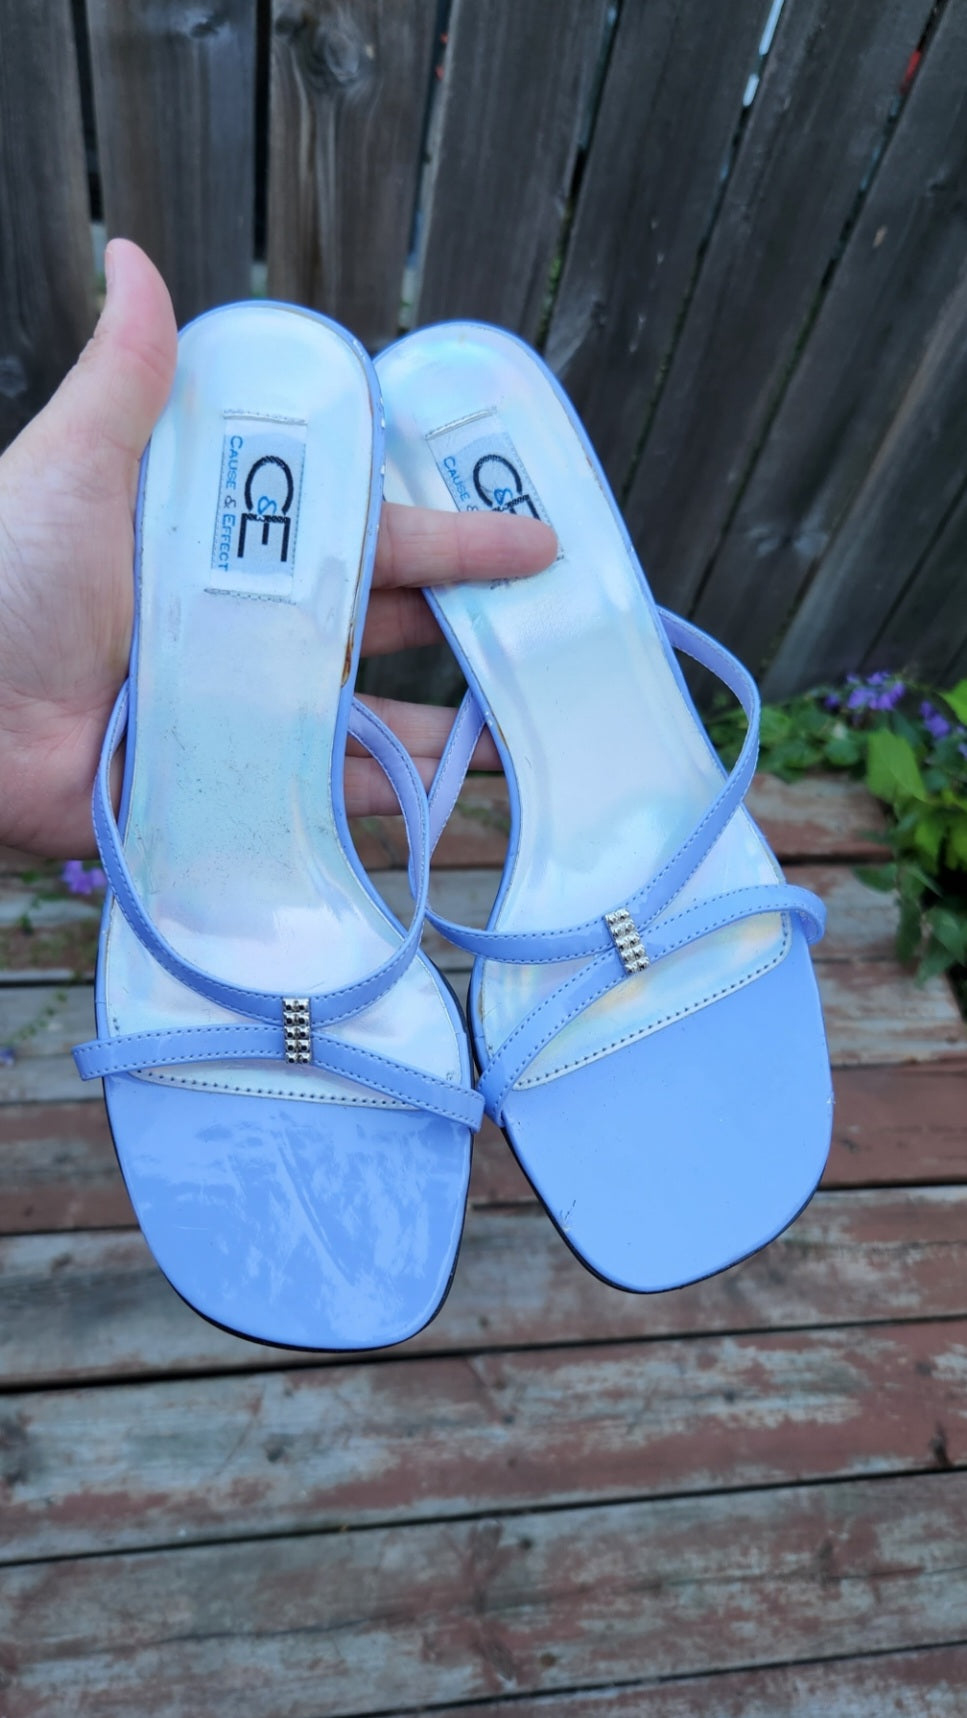 Size 7.5 Lavender and Holographic Strappy Kitten Heels